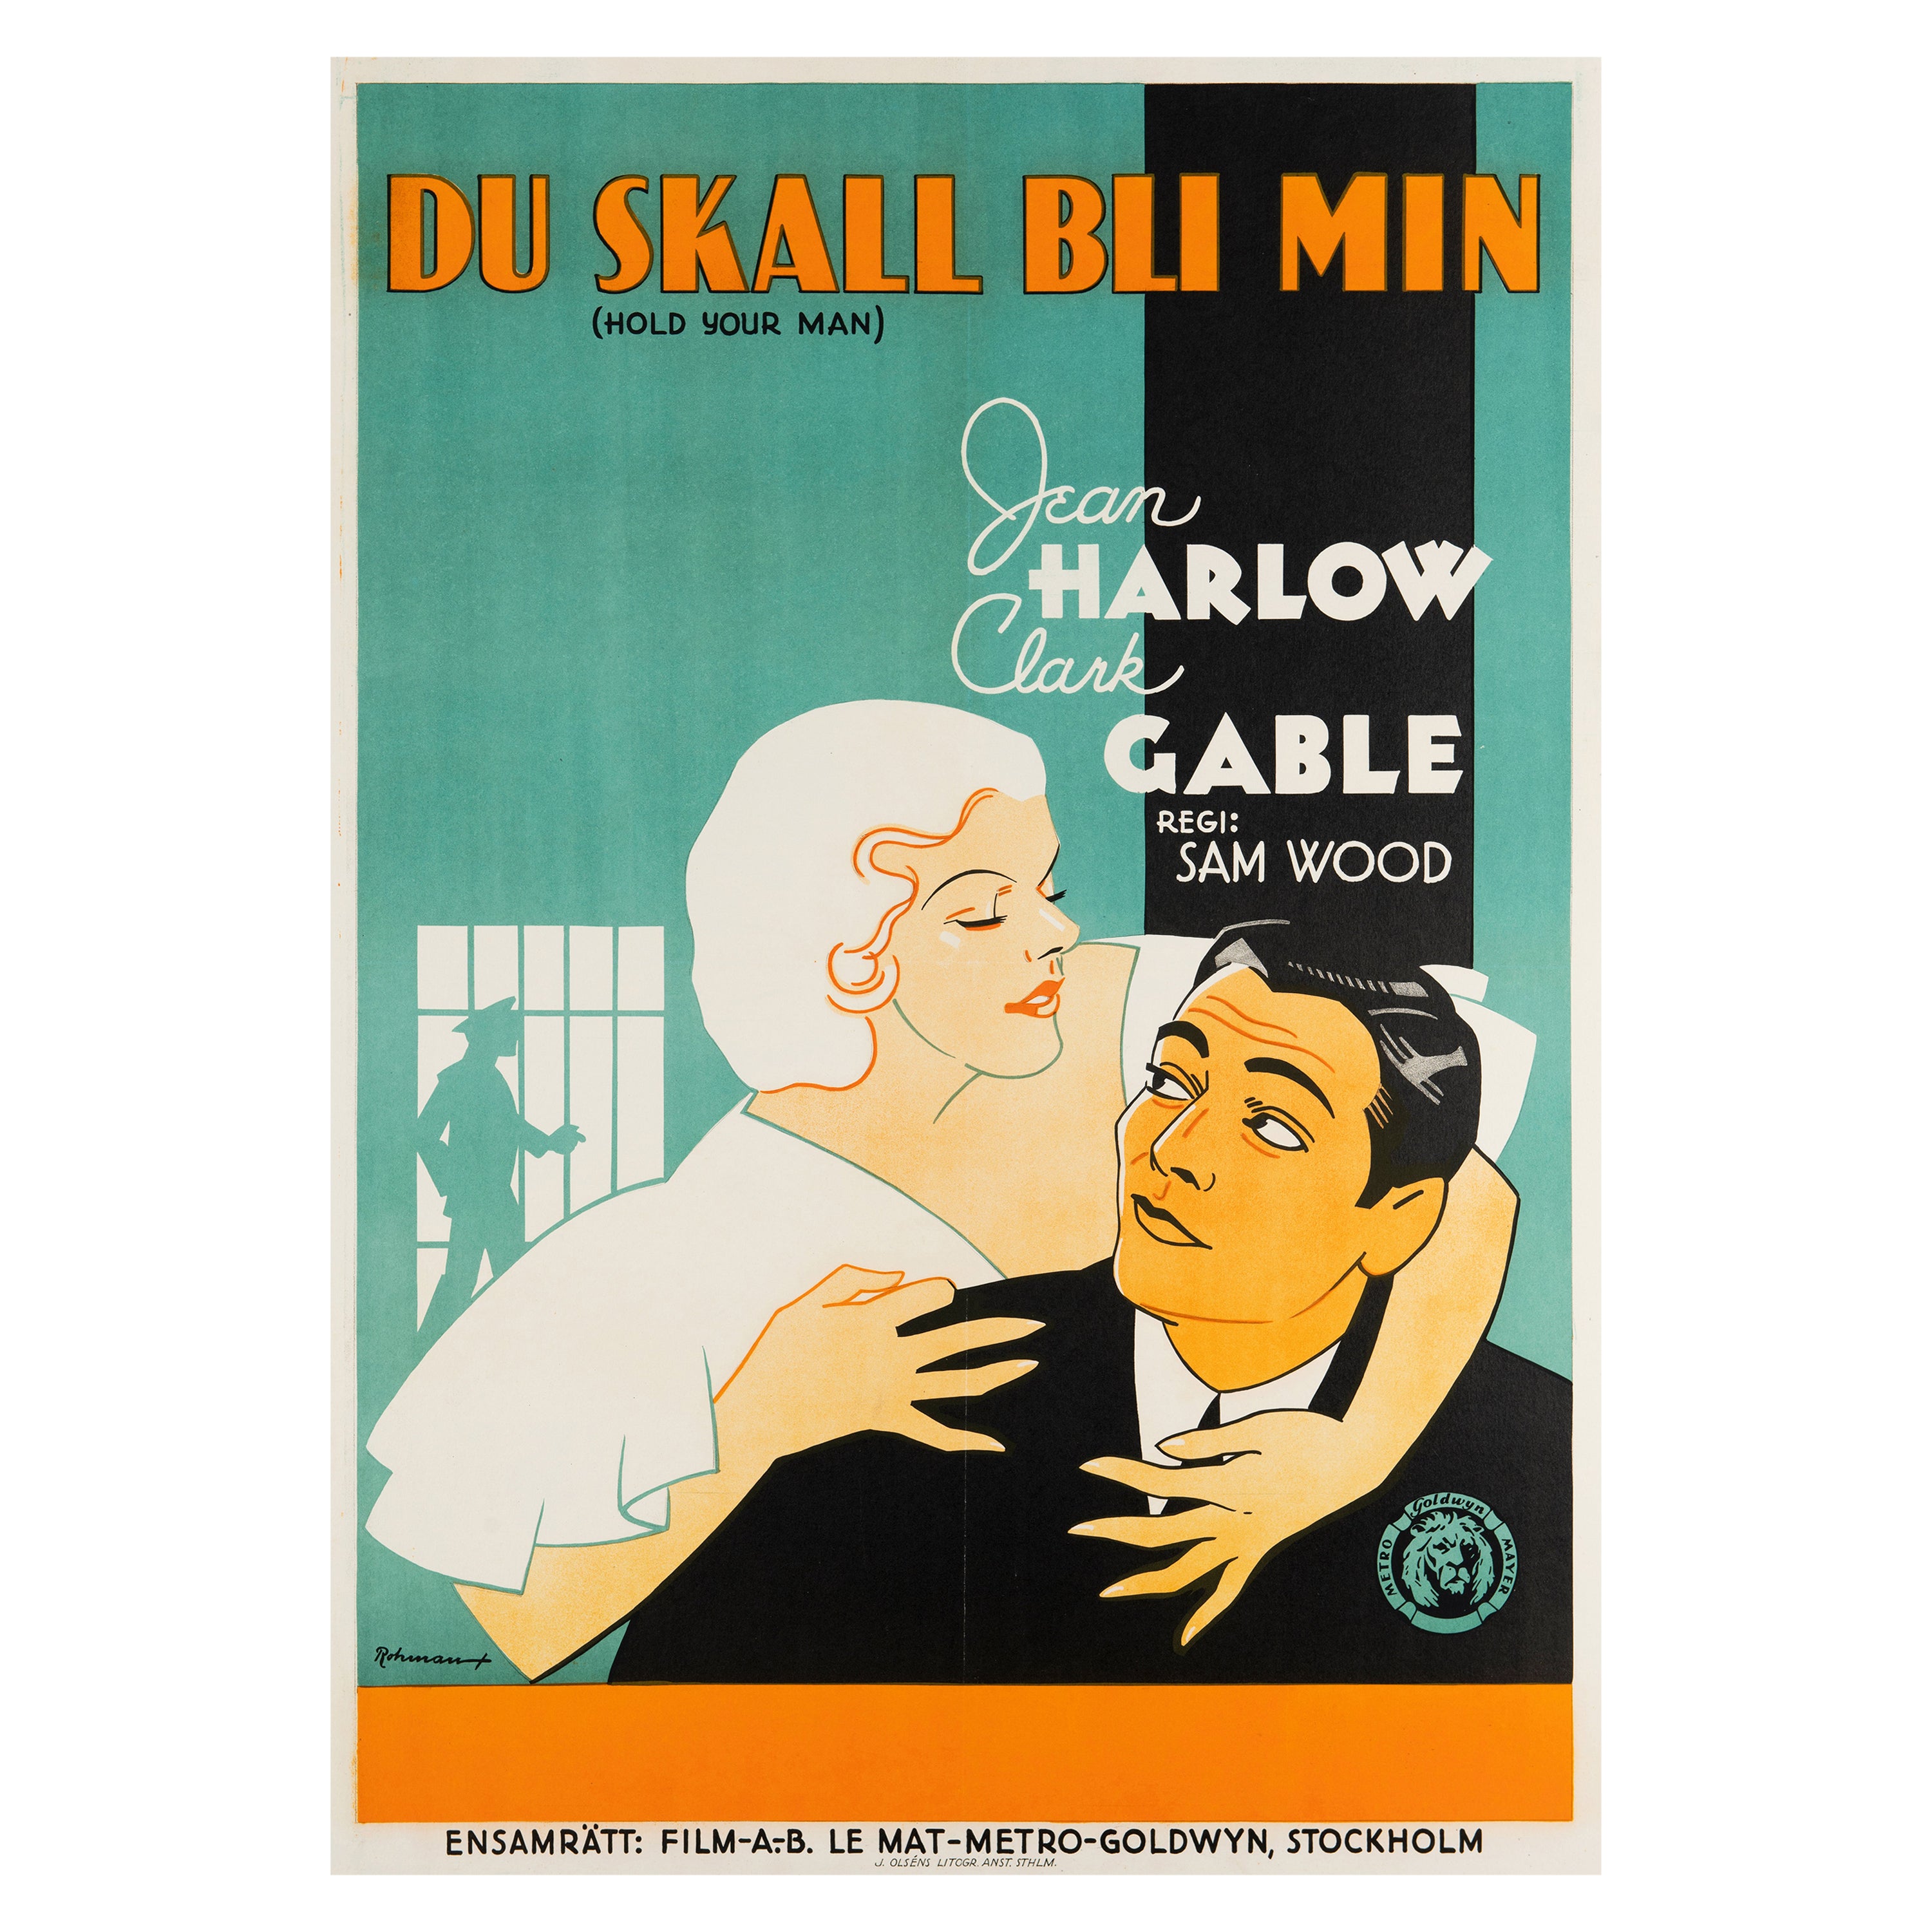 'Hold Your Man' Original Vintage Movie Poster by Eric Rohman, Swedish, 1933